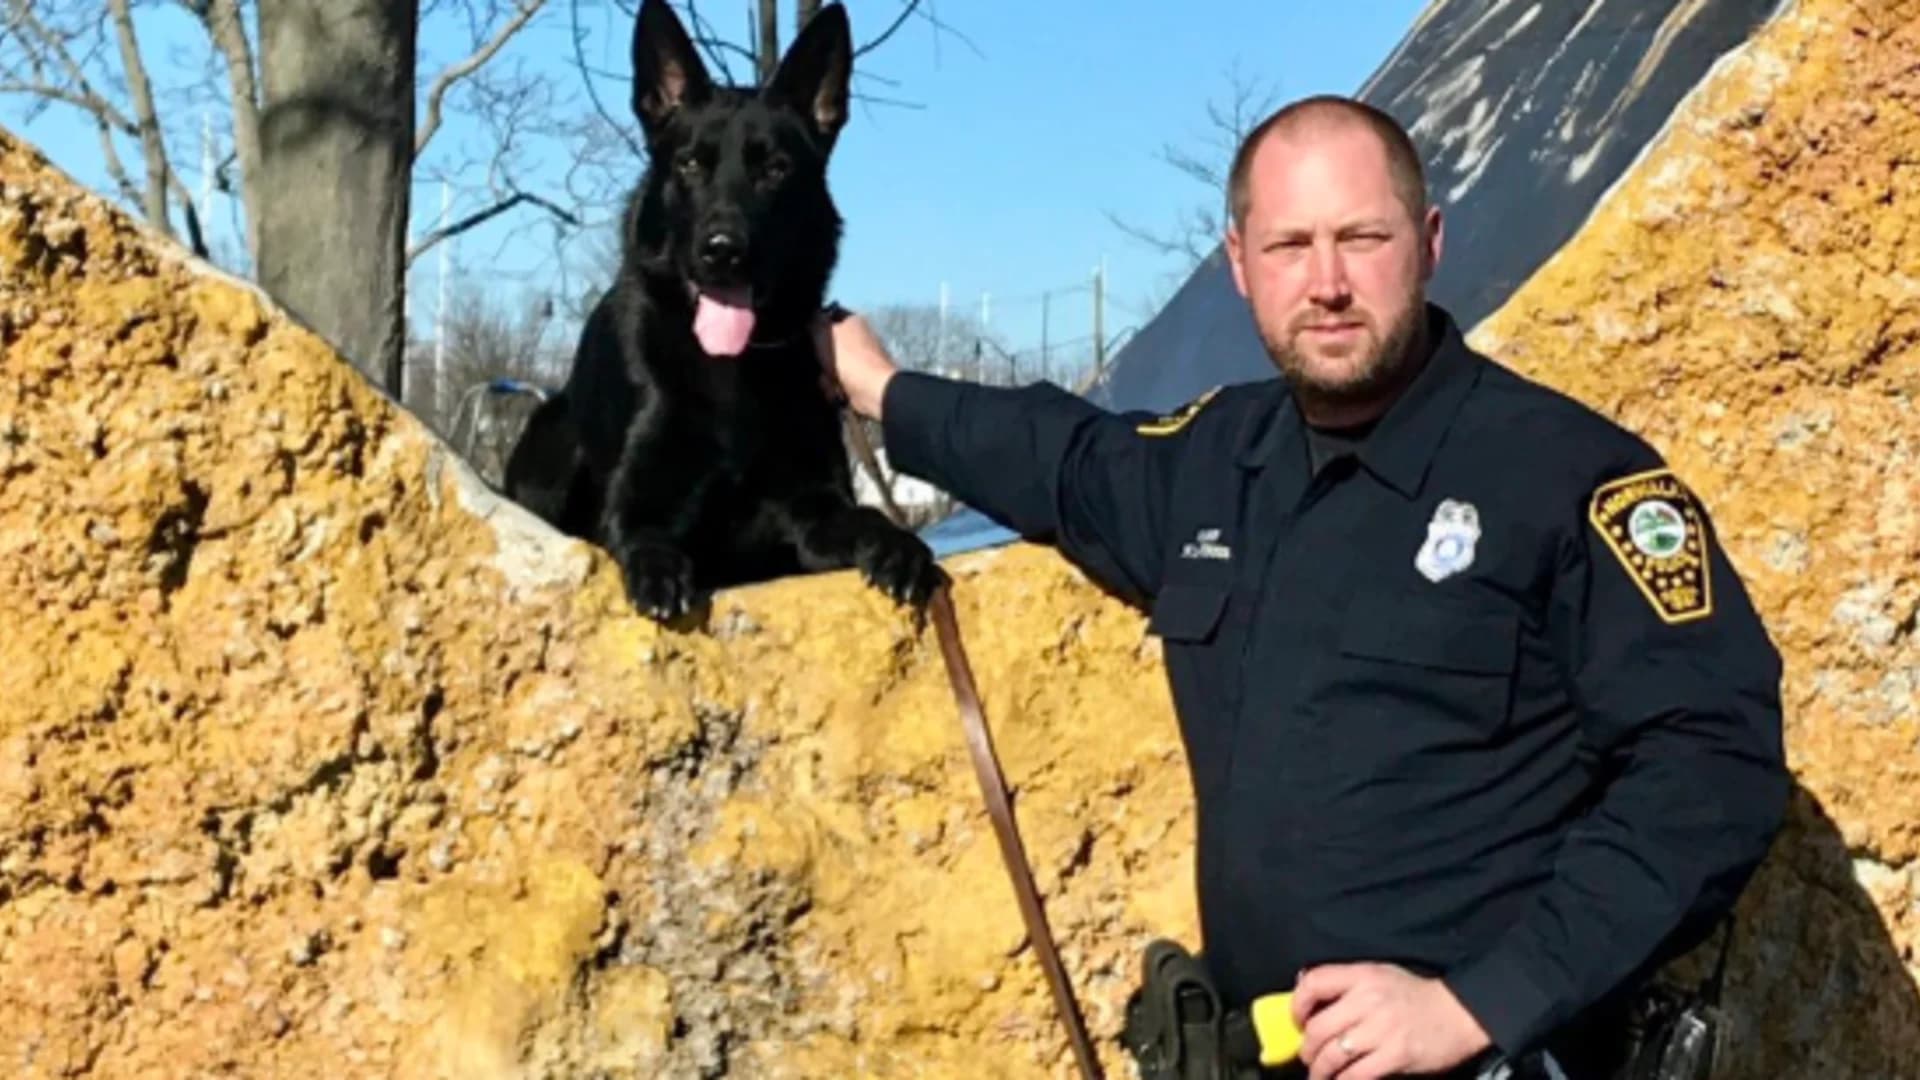 Norwalk police welcome new K-9 officers to department